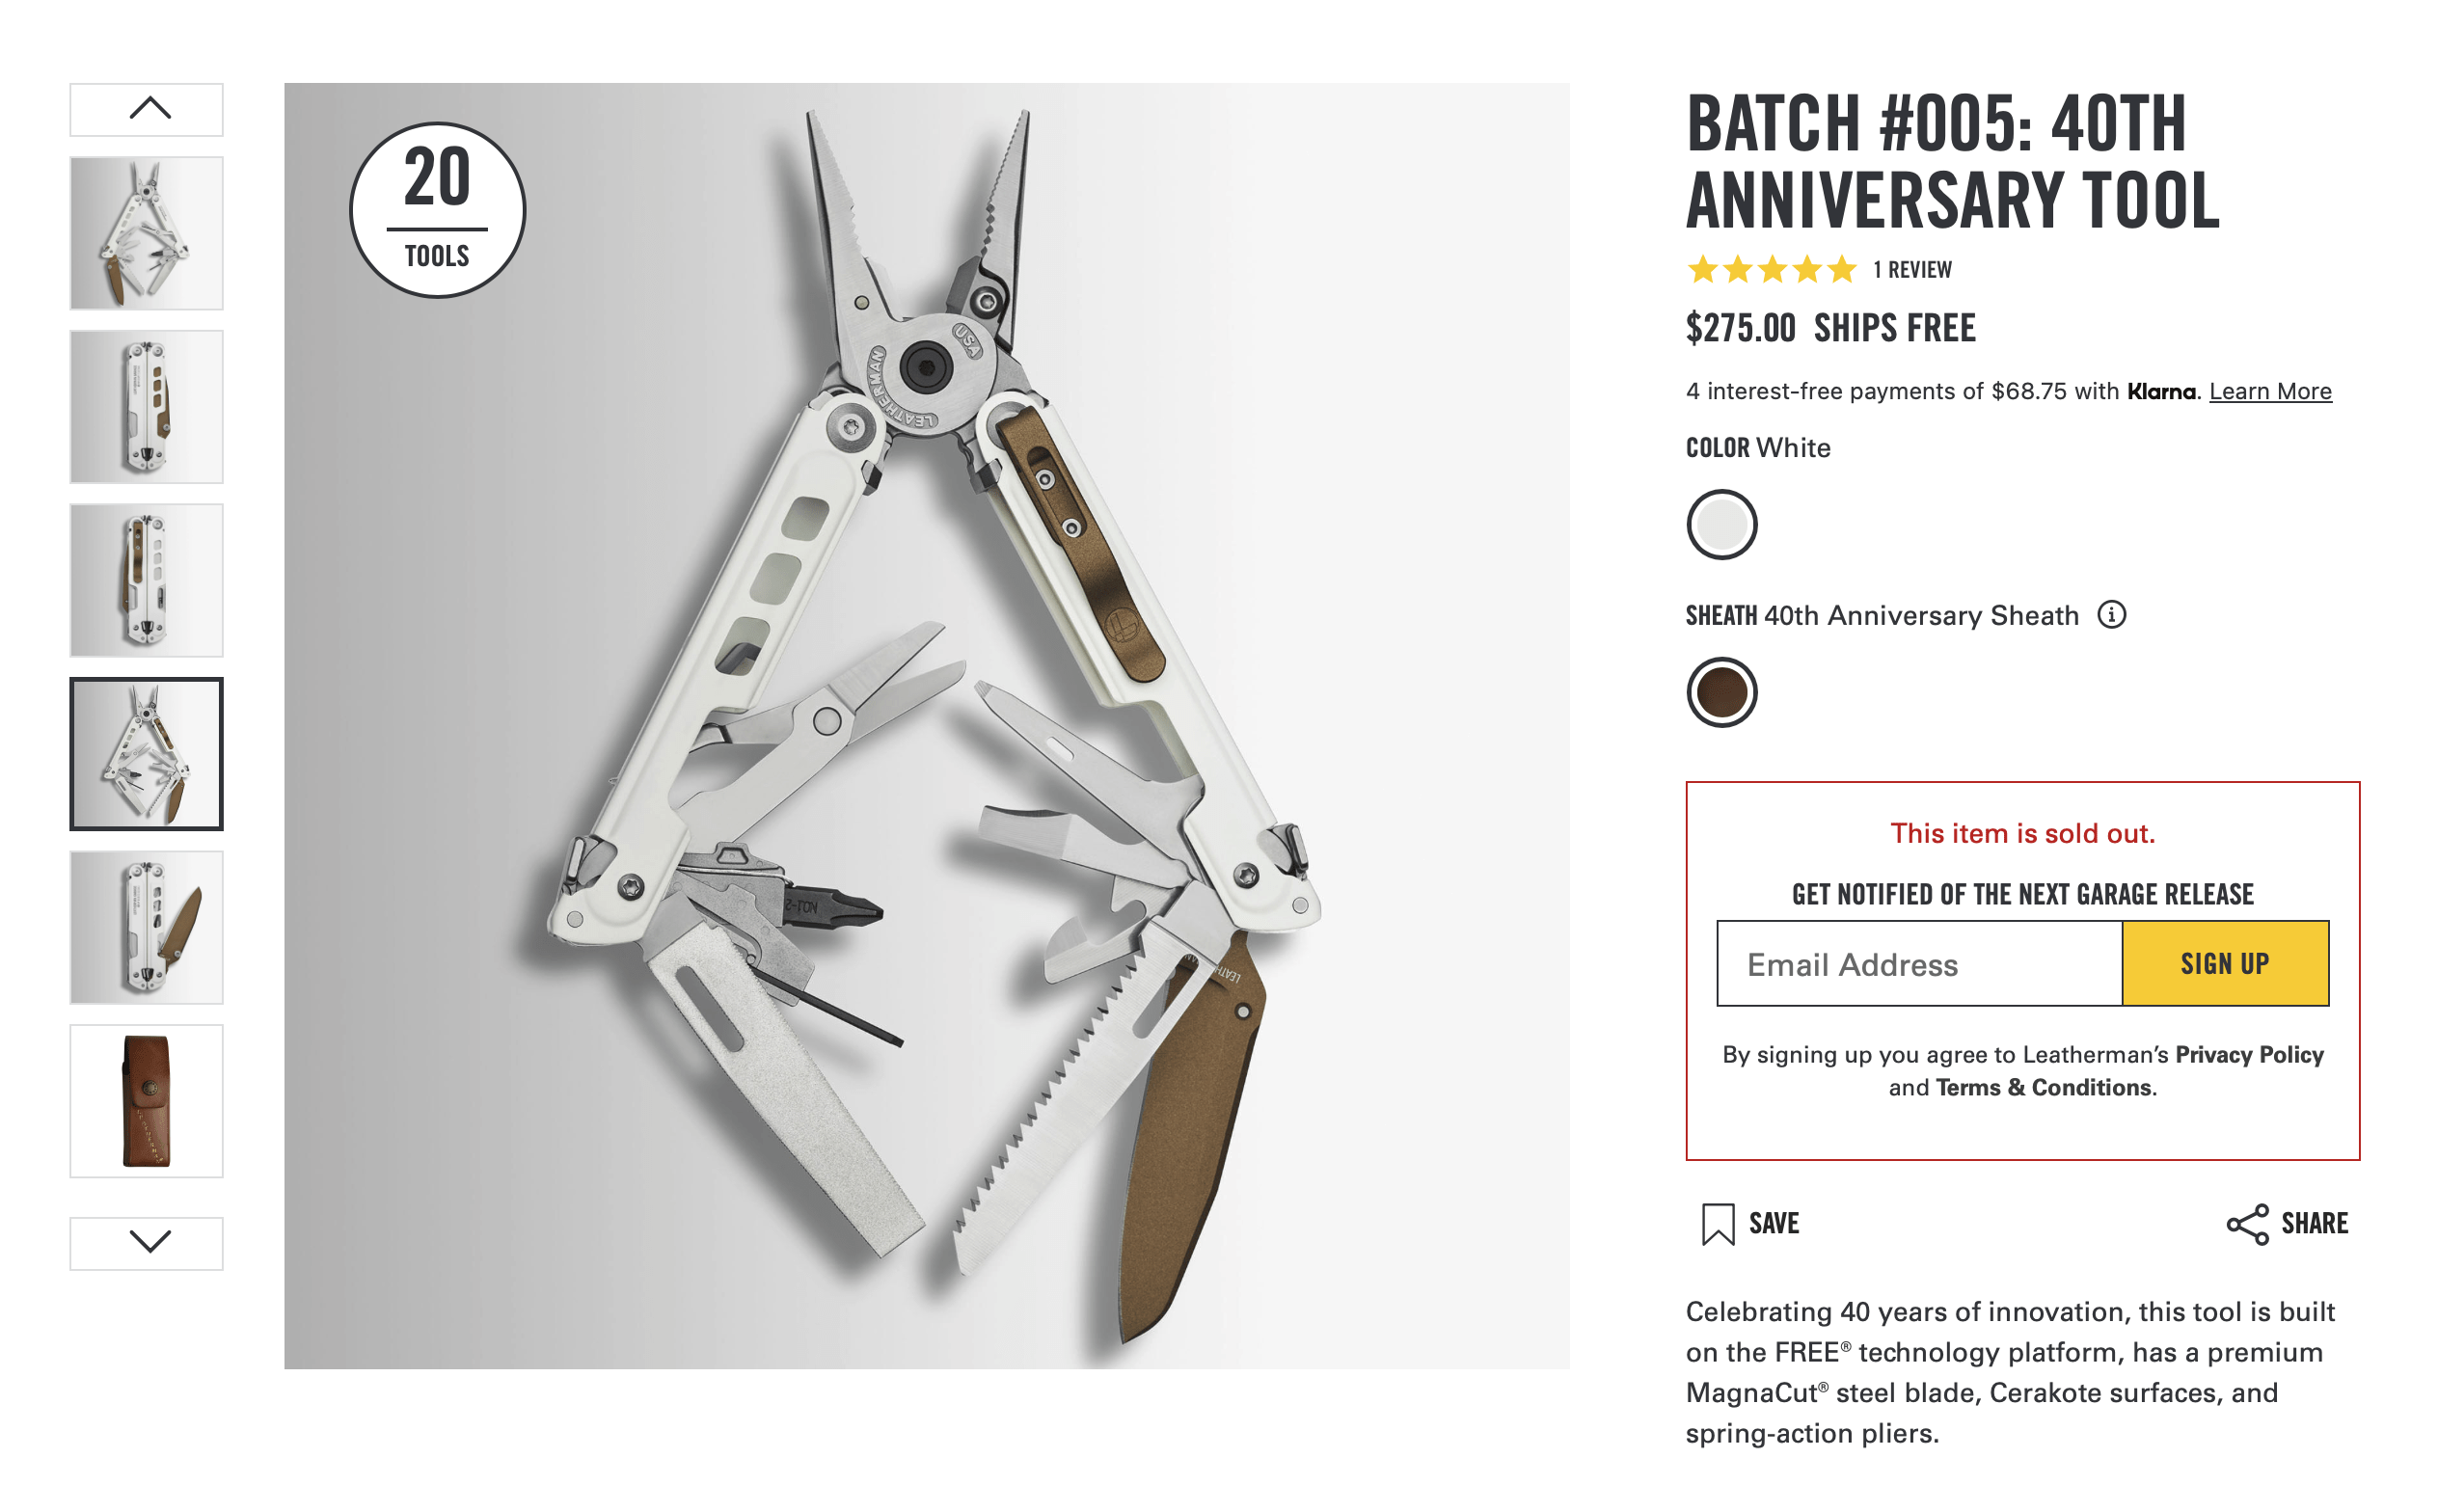 Leatherman Garage 5 40th anniversary sold out